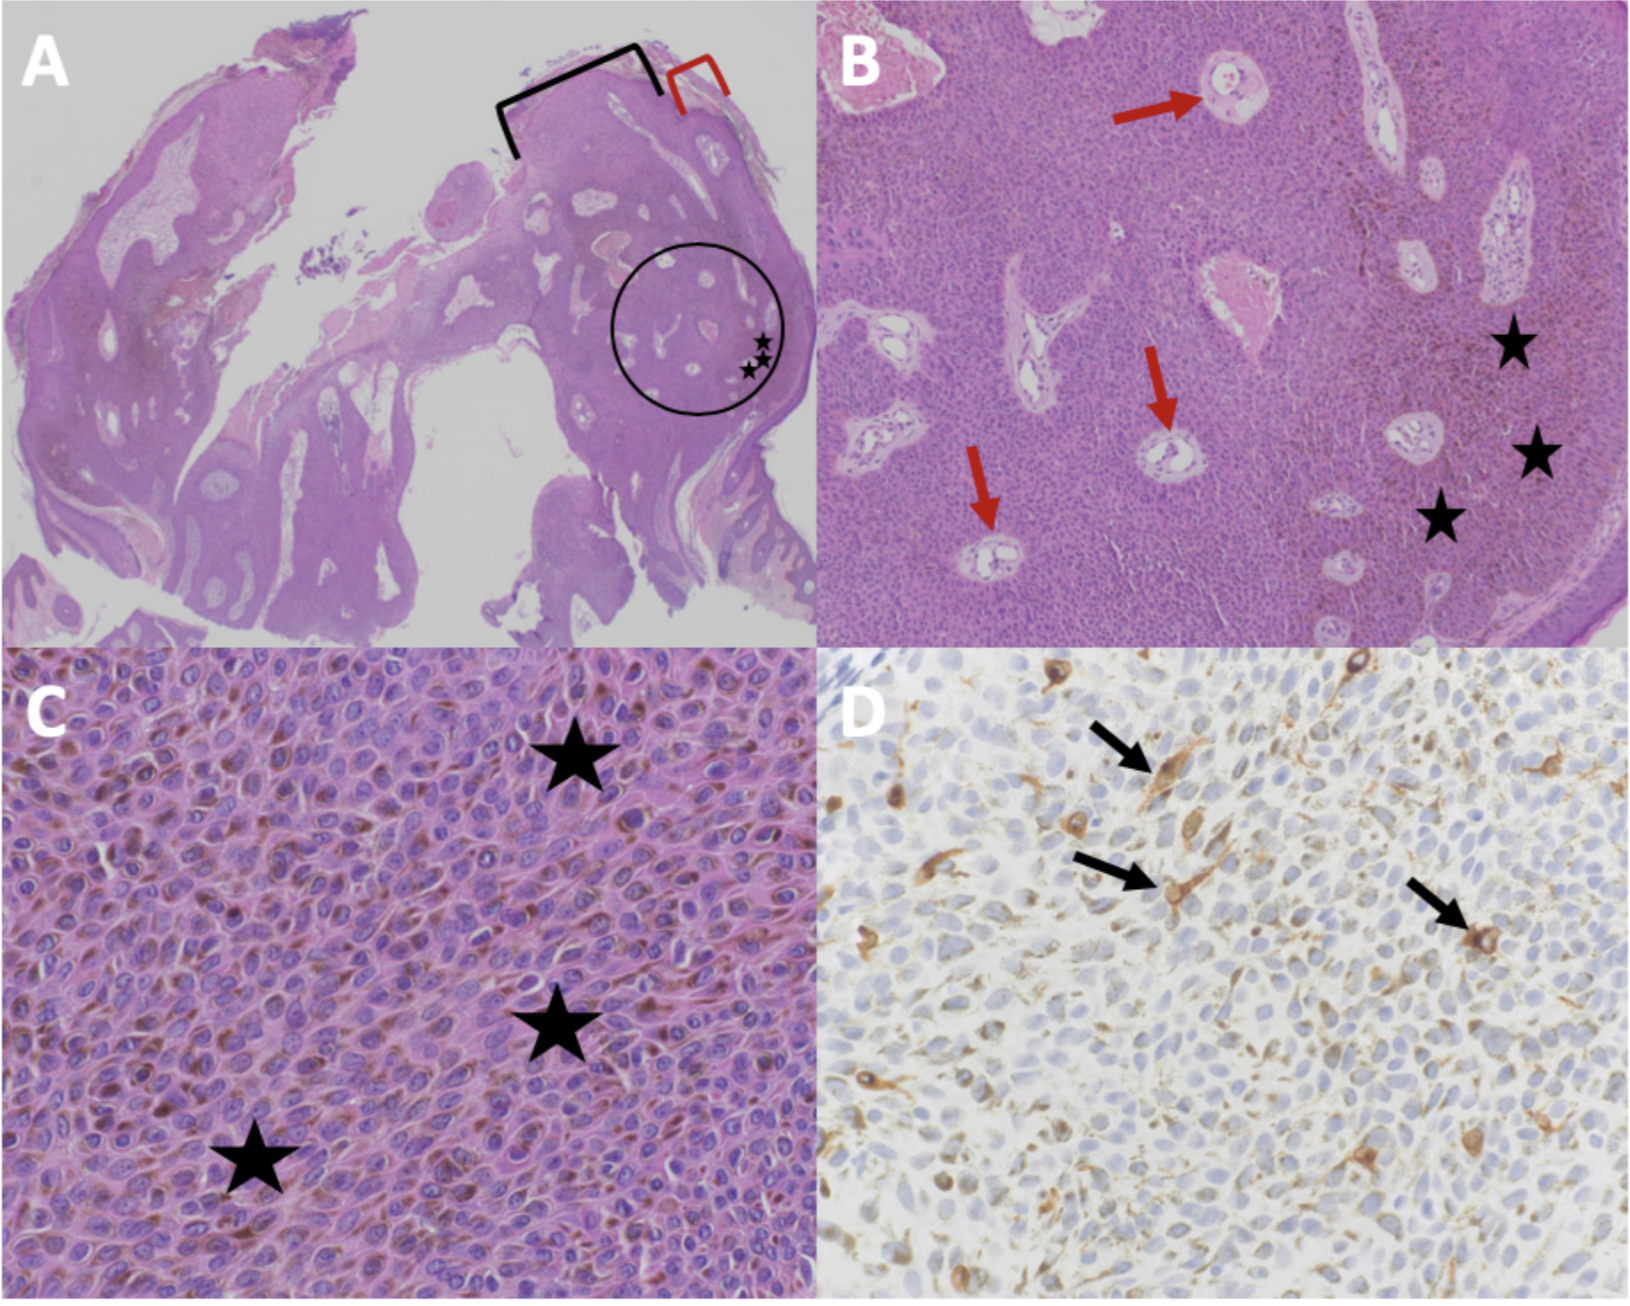 Figure 2. Microscopic presentation of melanoacanthoma on the right preauricular area. Low (A) and higher (B and C) magnification of hematoxylin and eosin (H&E) stained sections shows an exophytic nodule with hyperkeratosis (thickening of the stratum corneum as shown between the red bracket) and acanthosis (thickening of the epidermis as shown between the black bracket); the area enclosed in the black circle of image A is shown at higher magnification in image B.  There is hyperpigmentation throughout all layers of the epidermis (black stars).  Tangential sectioning of the tumor shows small areas of dermis, containing epithelial lined vessels and erythrocytes within the epithelium (red arrows).  There is lymphocytic perivascular inflammation in the dermis.  A higher magnification view (D) of MART-1 stained section shows positive staining of dendritic melanocytes throughout all layers of the epidermis (black arrows) (H&E: A, x2; B, x10; C, x40; MART-1 immunoperoxidase; D, x40). 